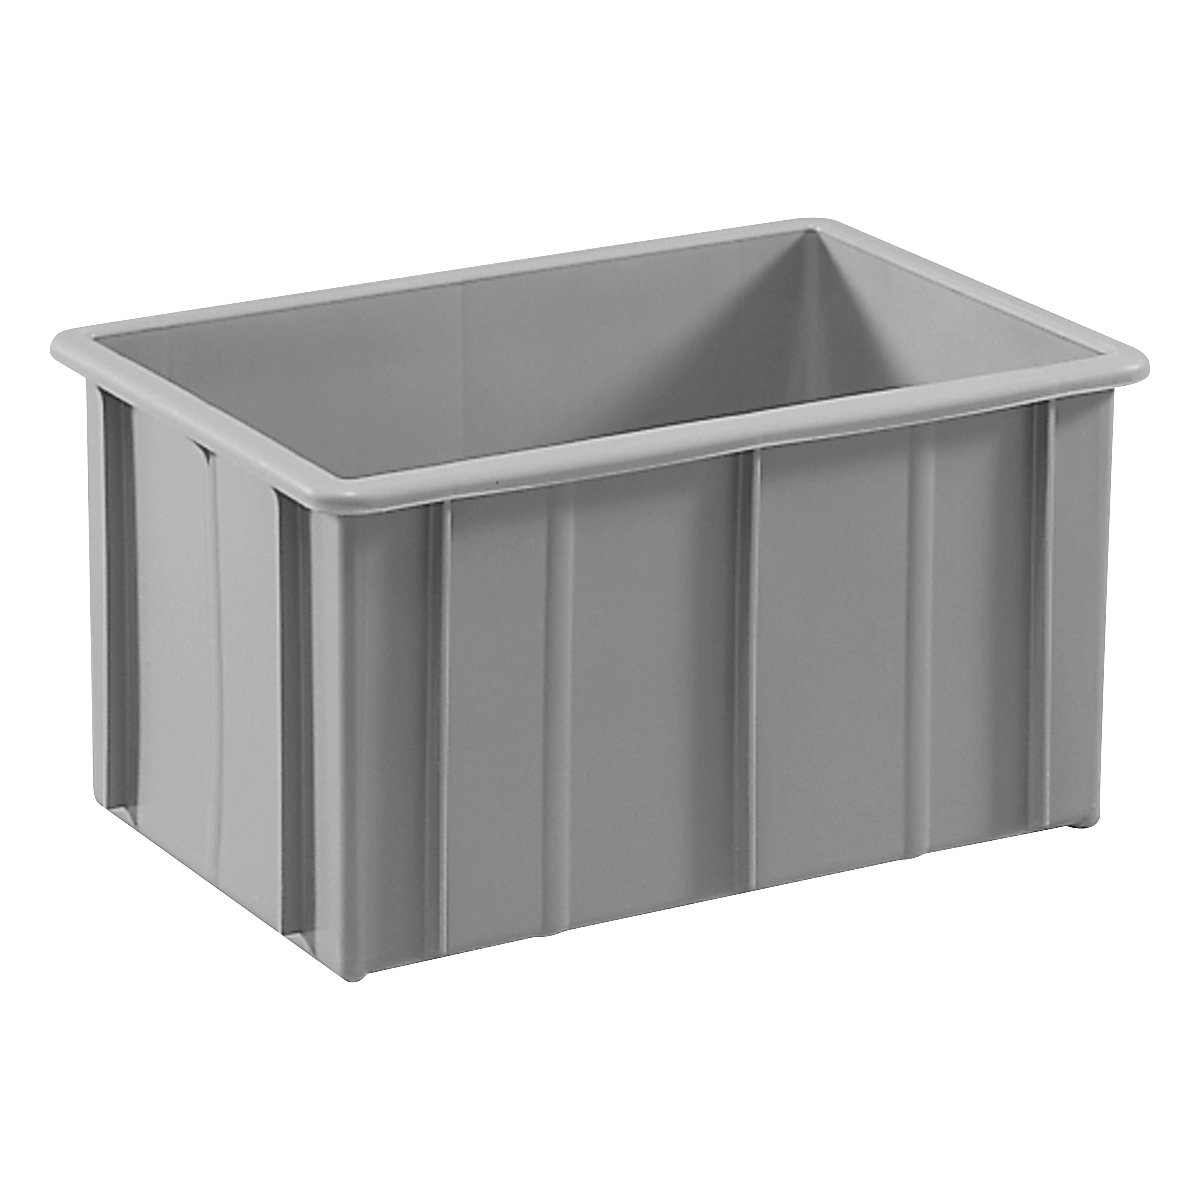 Stacking container made of polyethylene, with reinforcement ribs - mauser